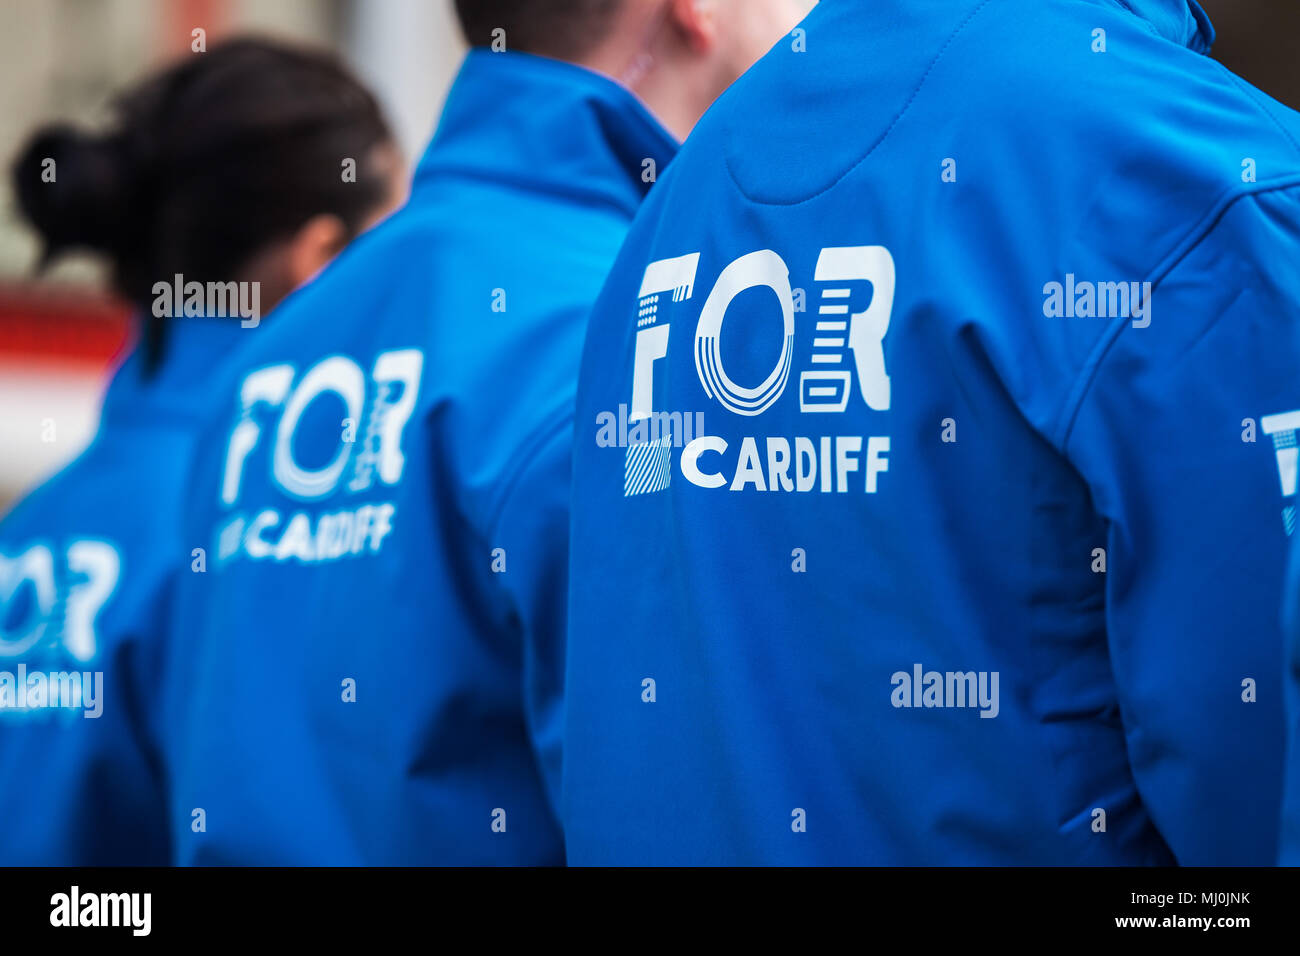 For Cardiff members on Queen Street, Cardiff Stock Photo